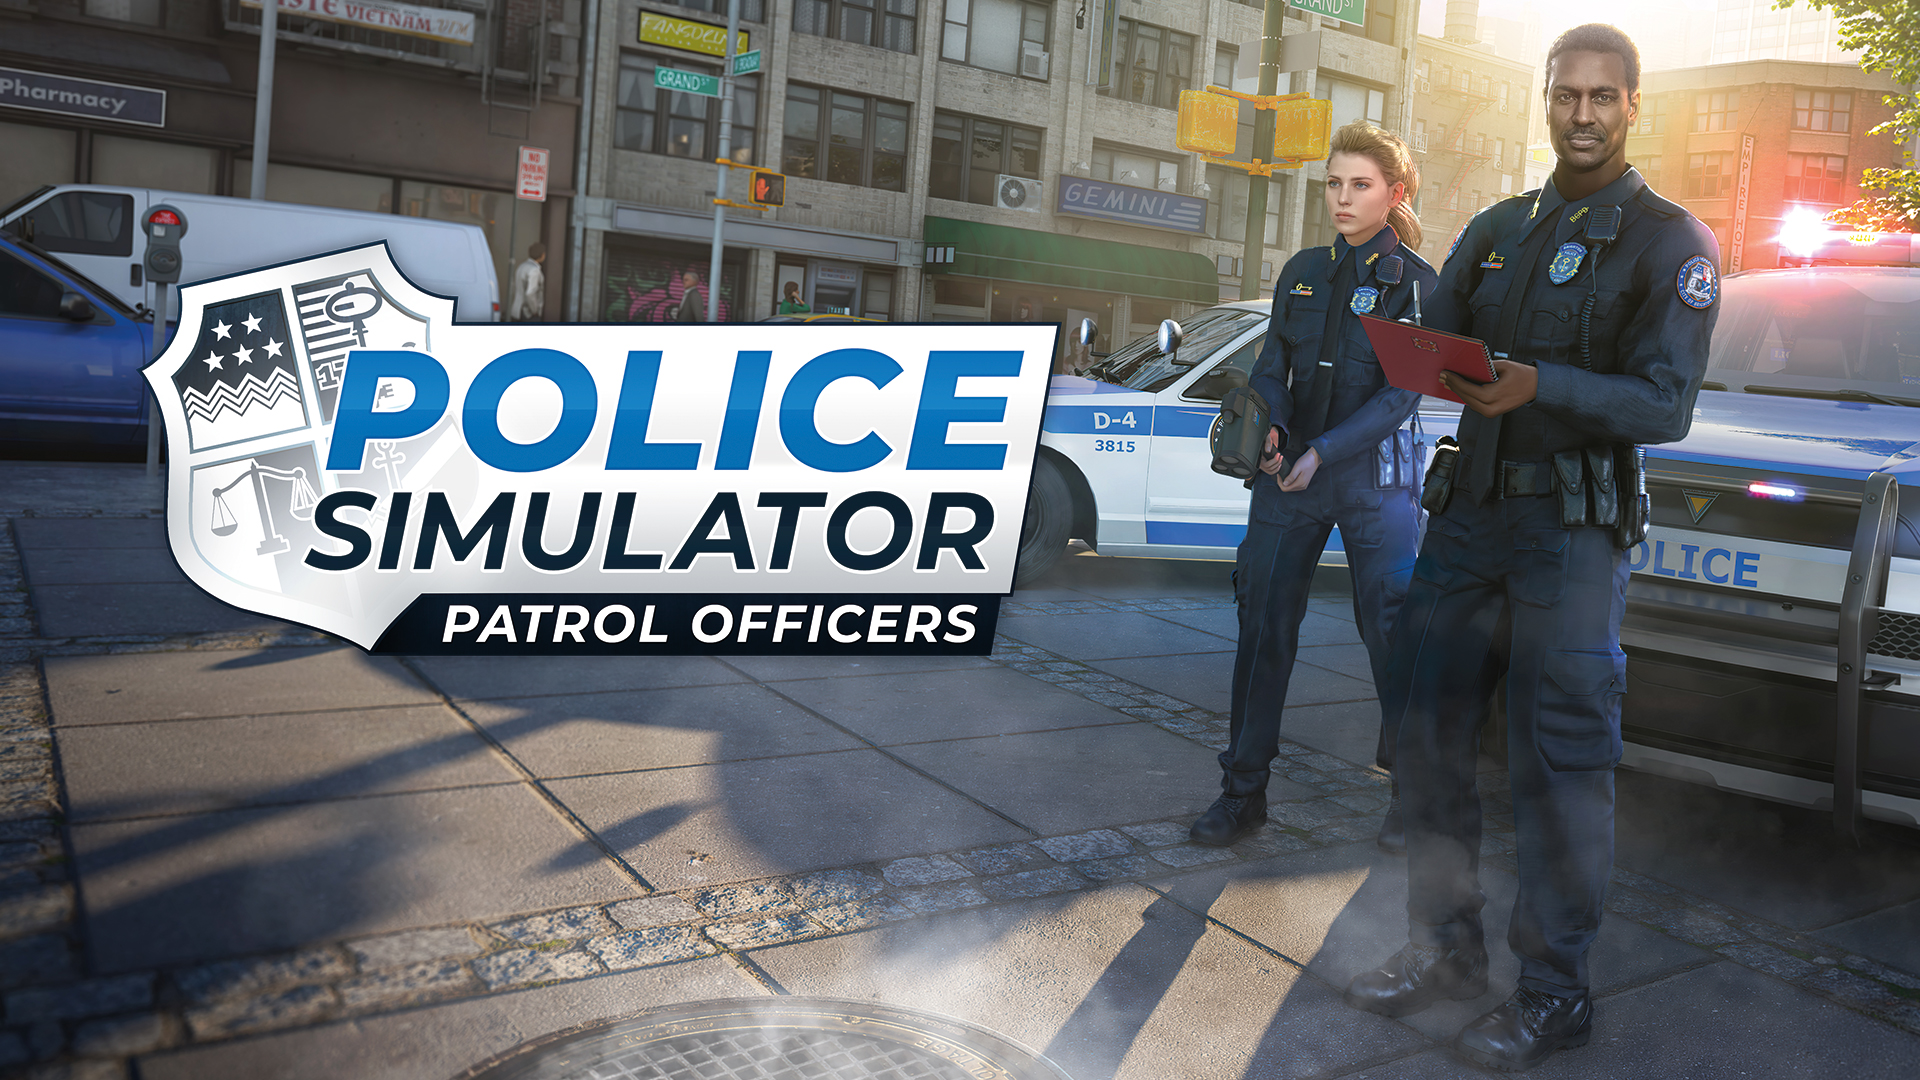 Police Simulator: Patrol Officers gets updates new